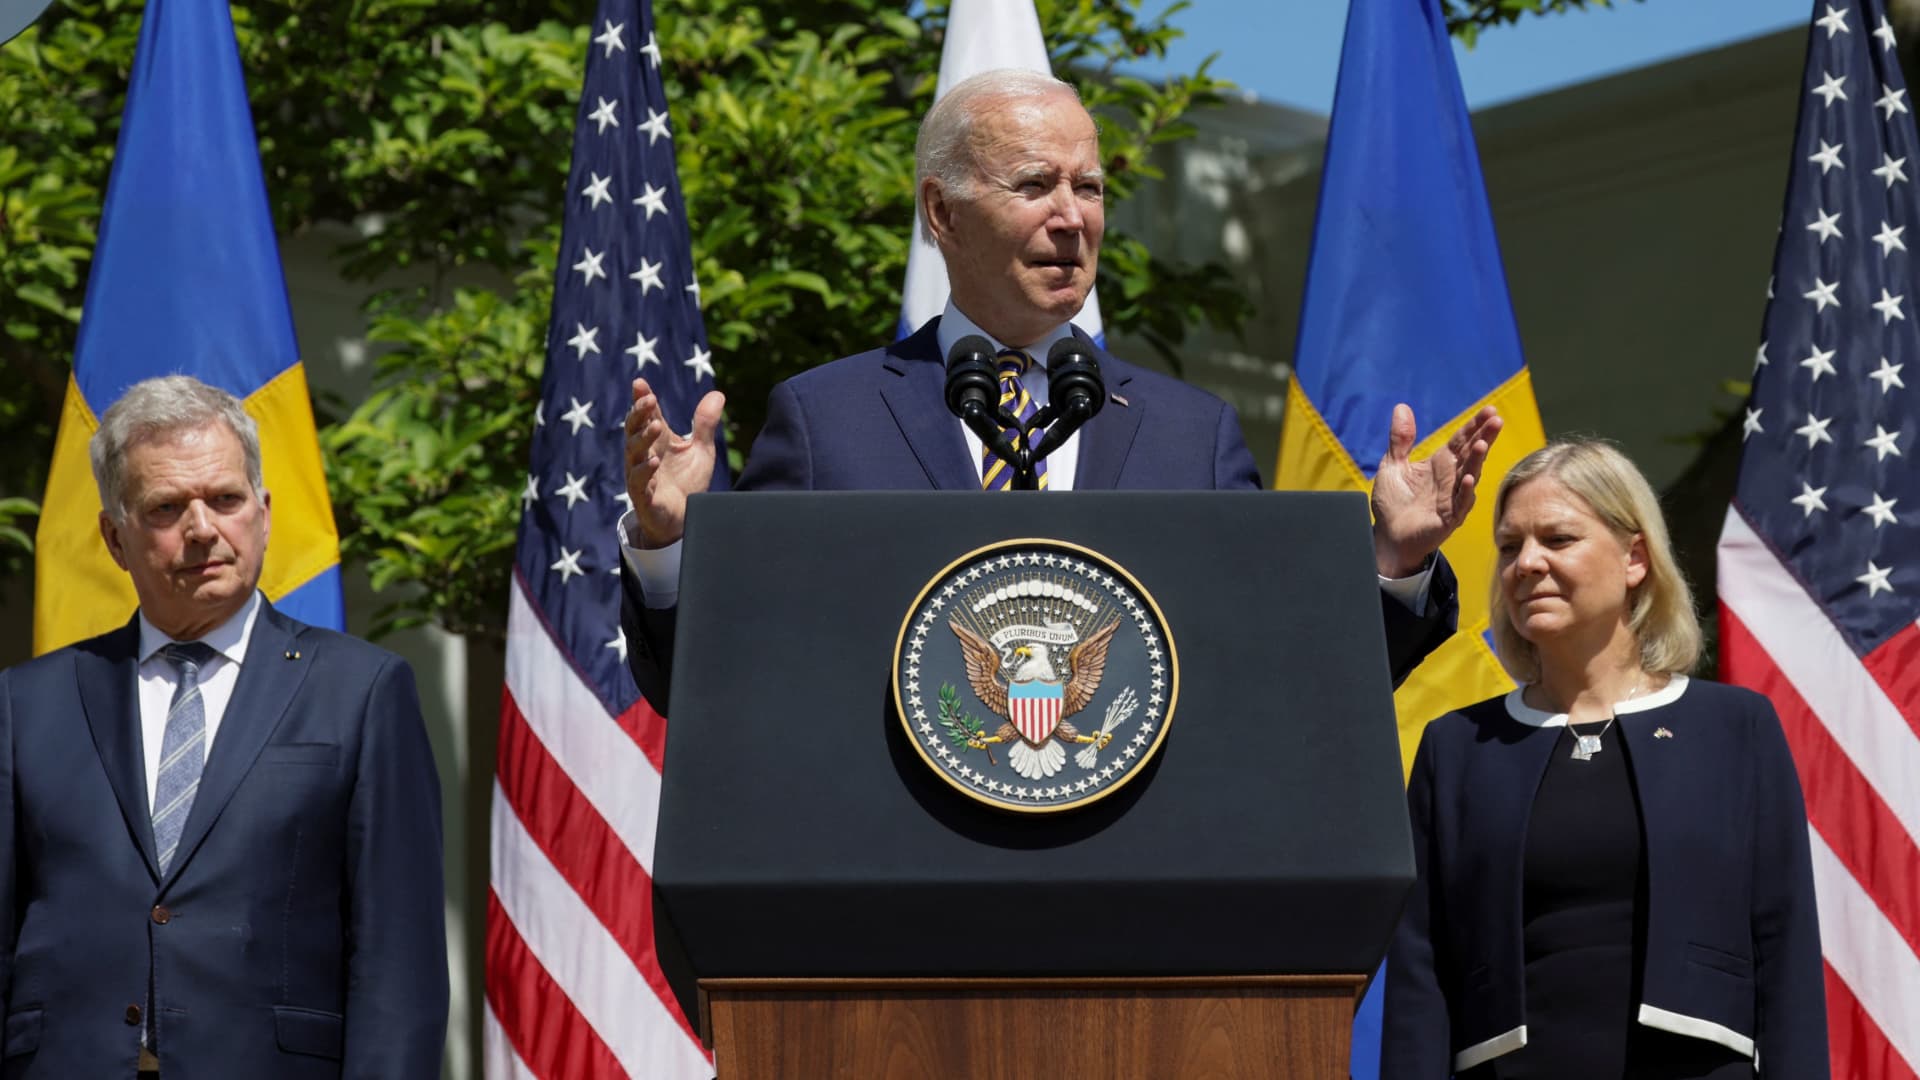 U.S. President Joe Biden delivers remarks next to Sweden's Prime Minister Magdalena Andersson and Finland's President Sauli Niinisto, in the Rose Garden of the White House in Washington, U.S., May 19, 2022. 